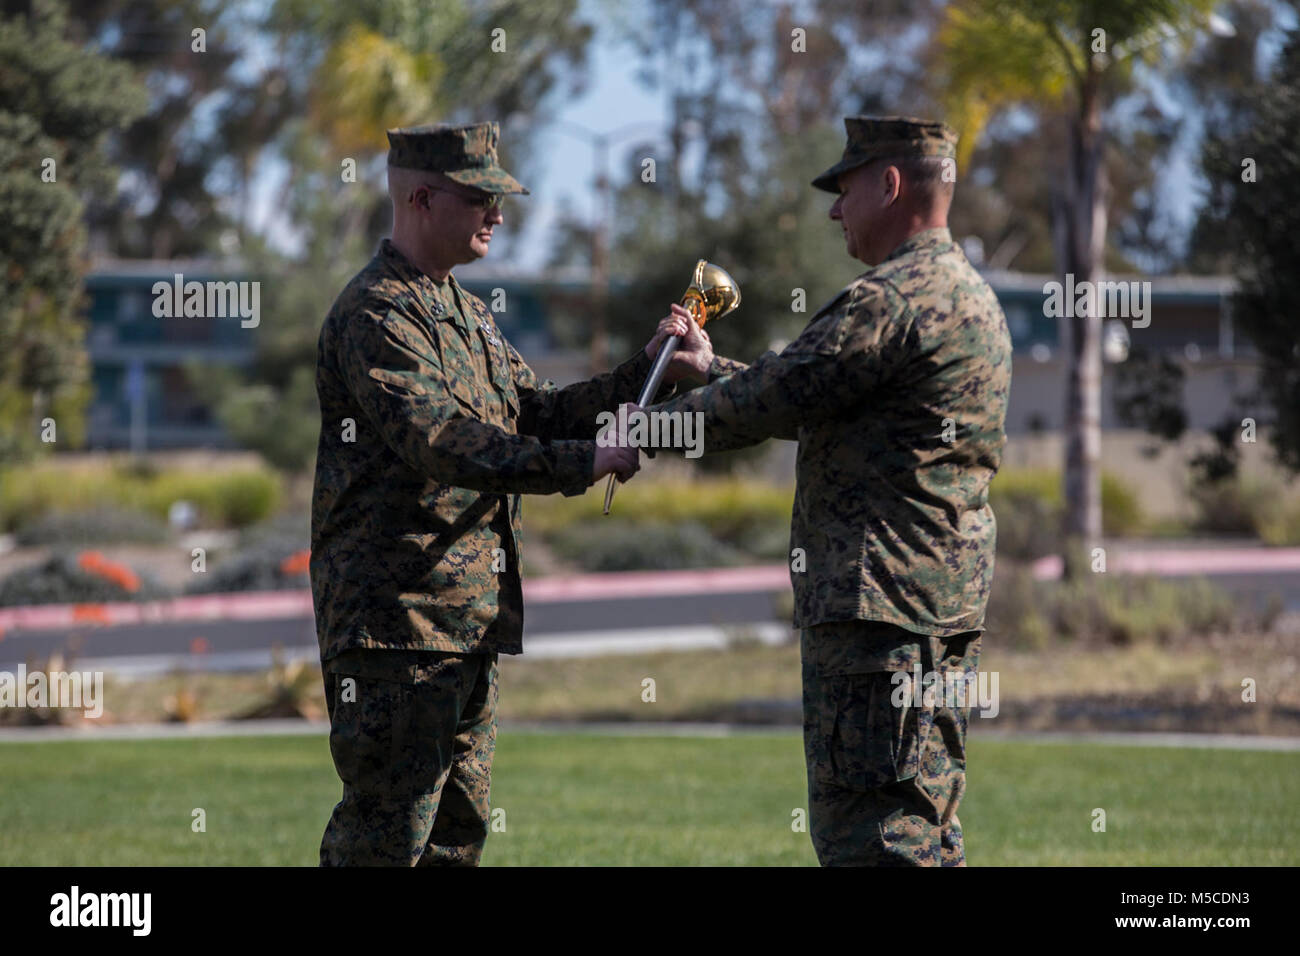 U.S. Marine Brig. Gen. Stephen Sklenka, the commanding general for the 1st Marine Logistics Group, passed the petty officer’s cutlass to Master Chief Petty Officer Zachary Pryor, command master chief for the 1st MLG, during his appointment ceremony at Camp Pendleton, Calif., Feb. 13, 2018. The last U.S. Navy cutlass manufactured was the Model 1917, made in 1917, until they were declared obsolete in 1949. (U.S. Marine Corps Stock Photo